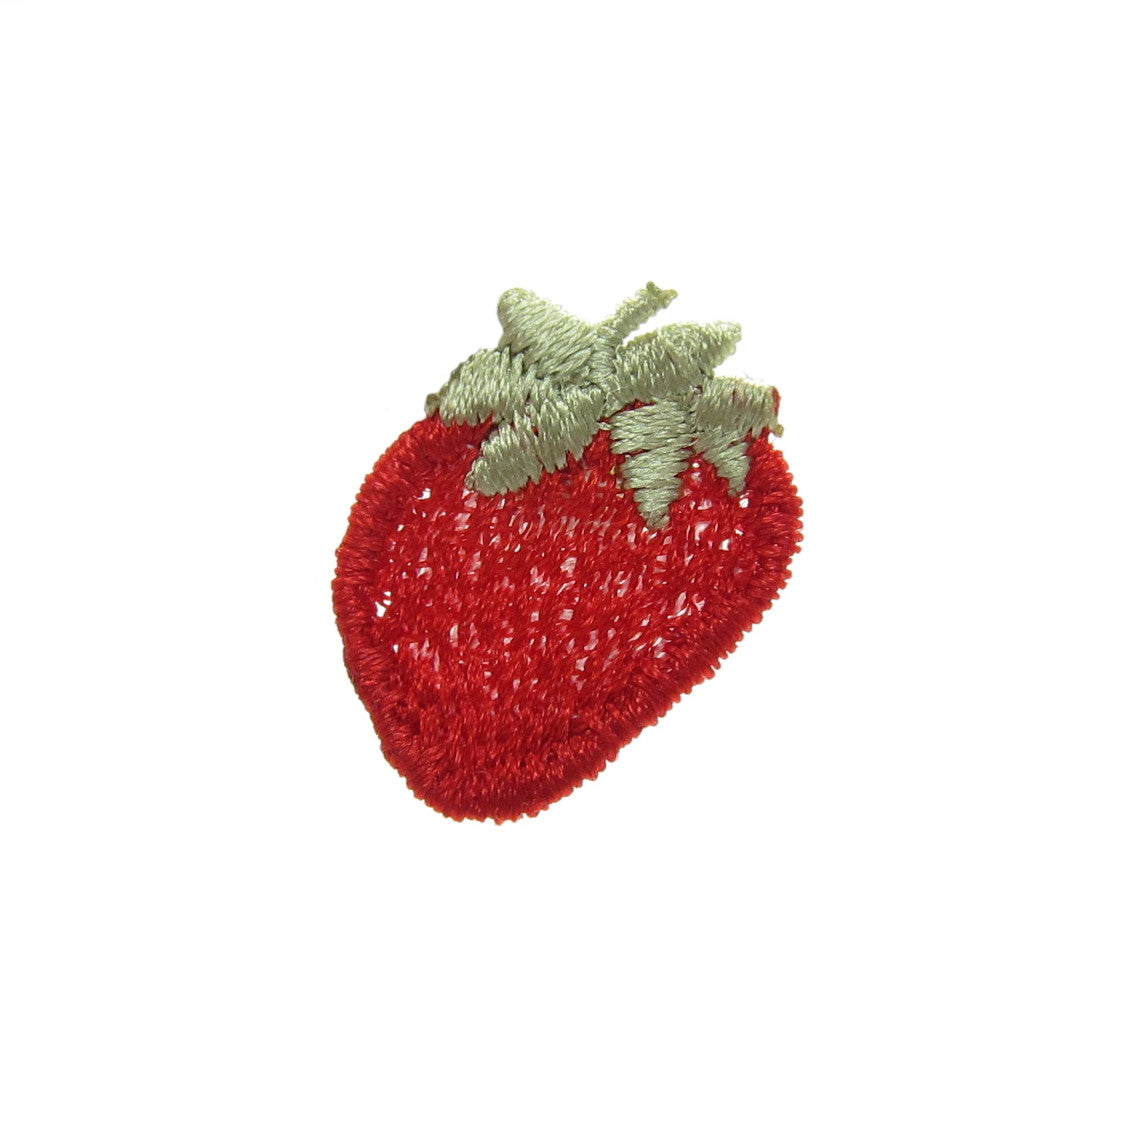 Replacement Embroidered Strawberry Patch for Strawberry Shortcake Doll Hat